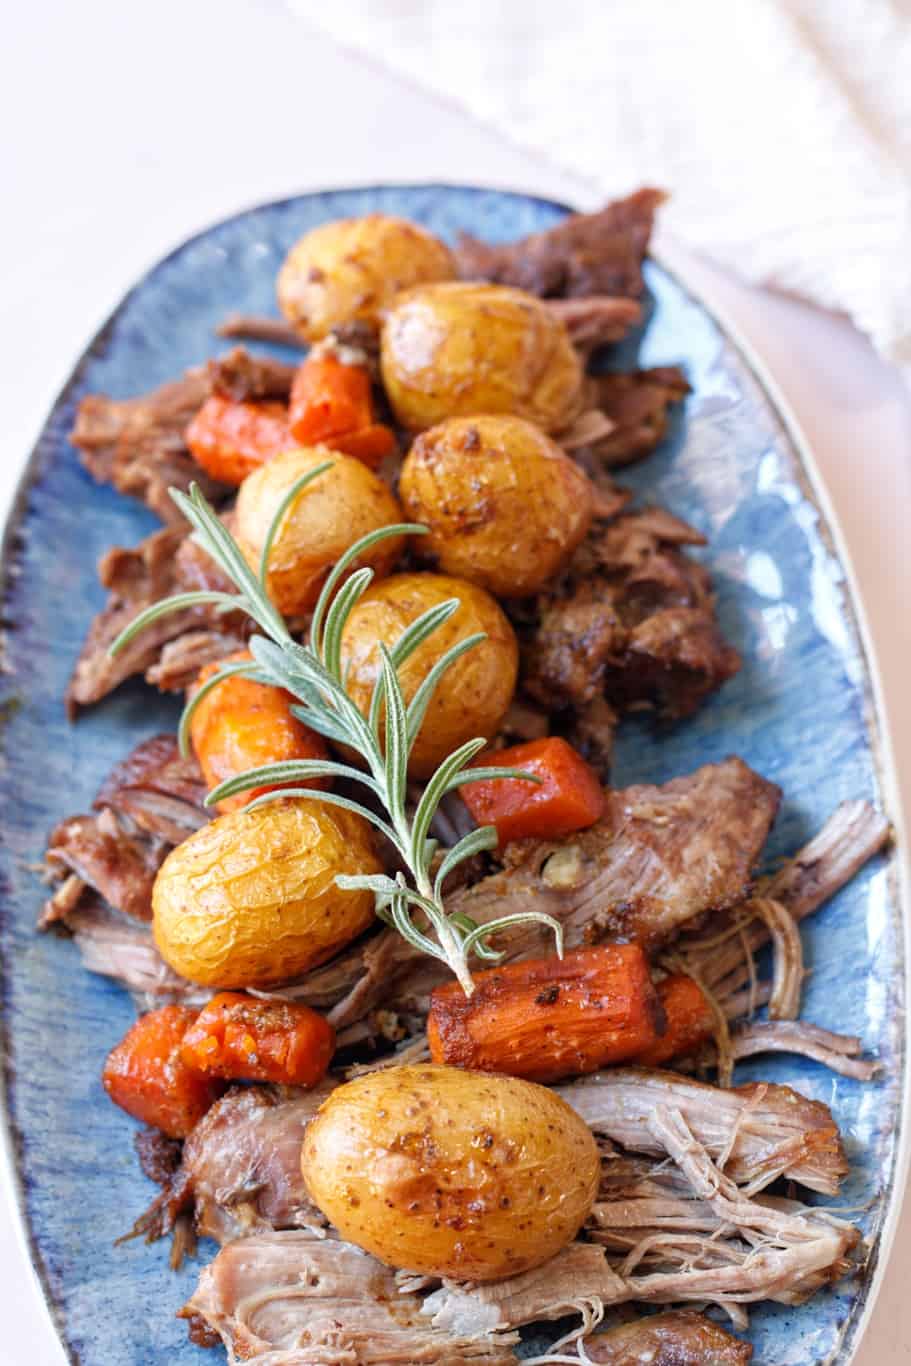 tender and juicy lamb shanks with roasted carrots and golden potatoes